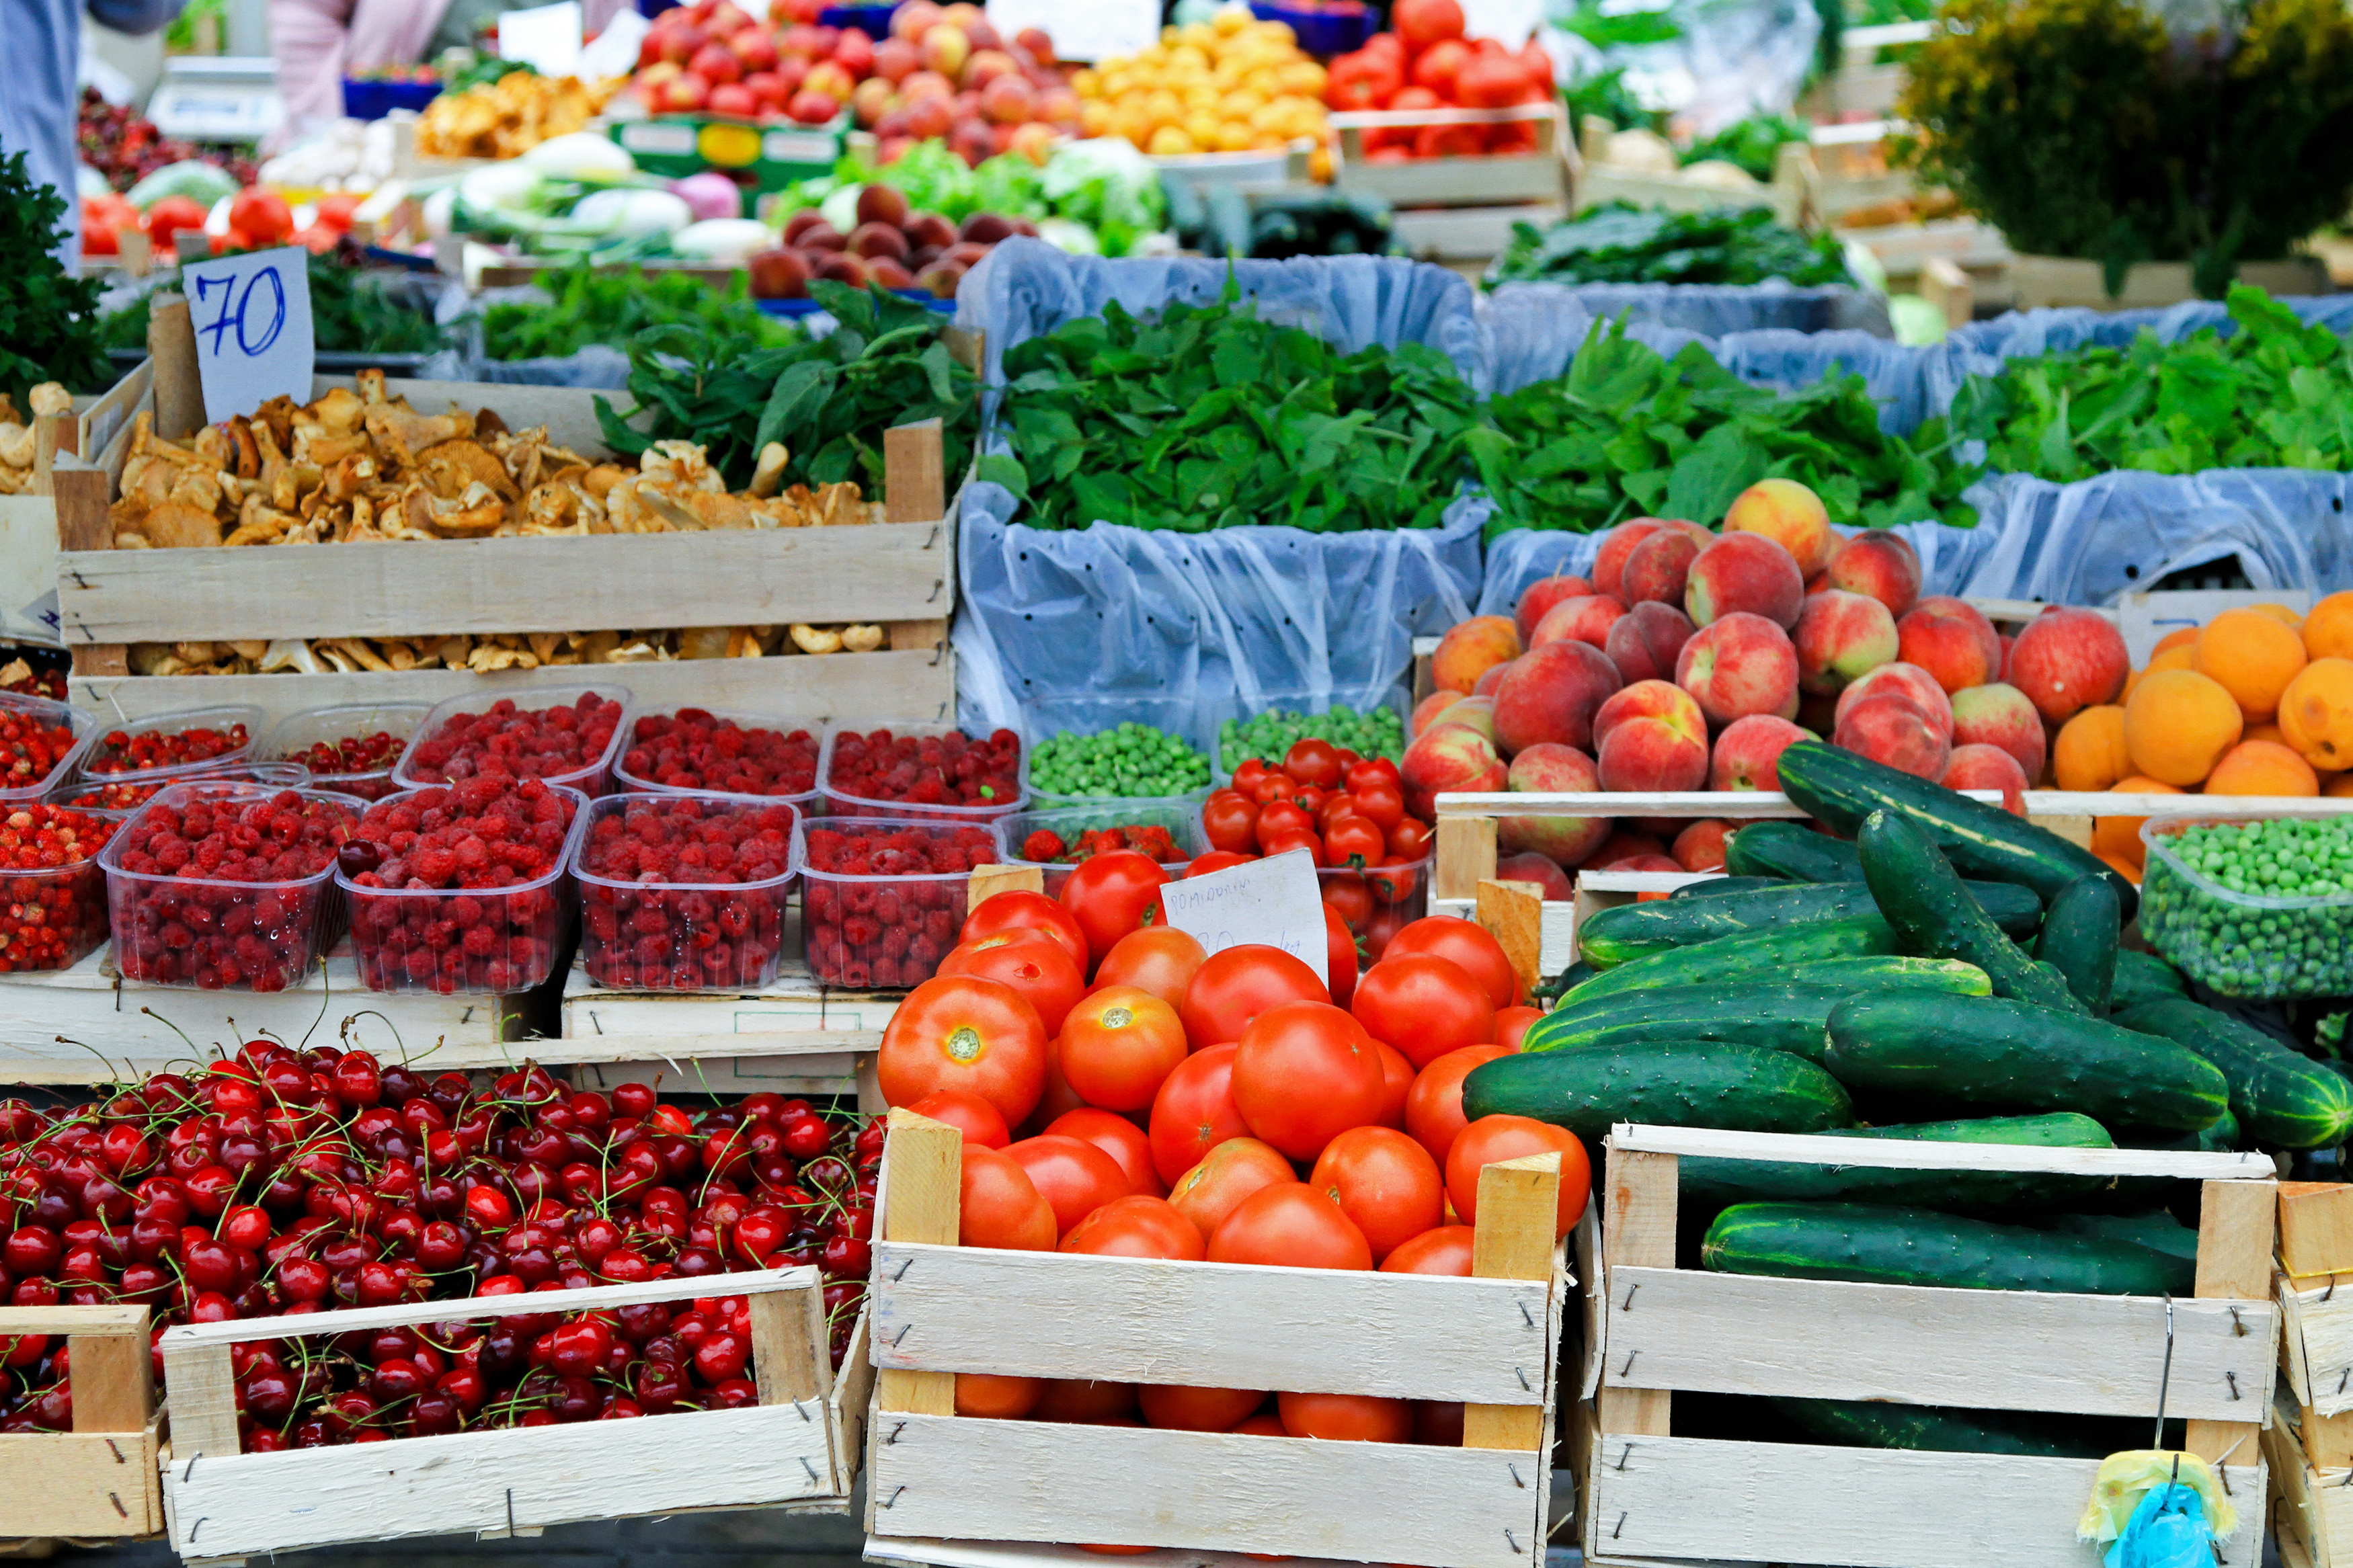 Fruits and vegetables at a produce stand